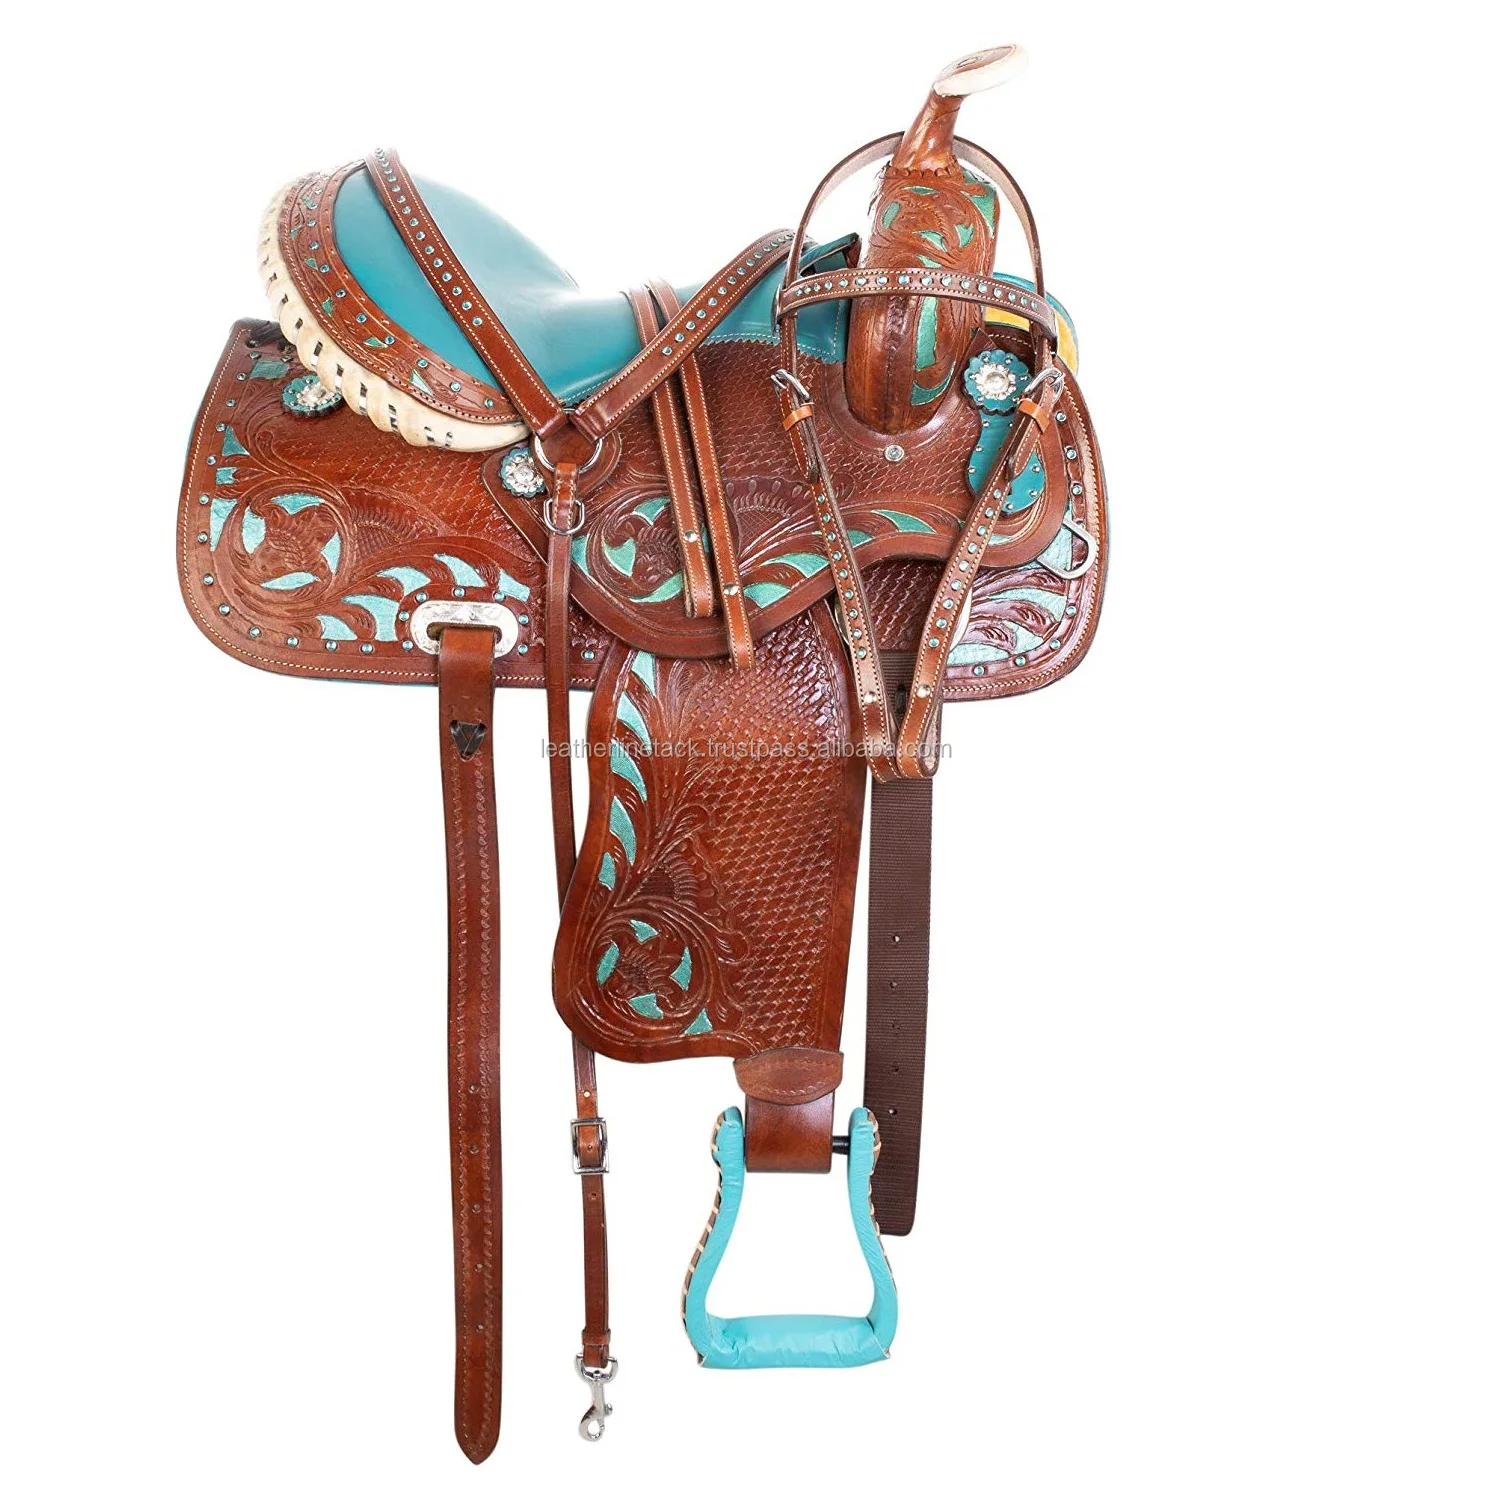 USED HEADSTALL SHOW WESTERN BLING HORSE BRIDLE TRAIL PLEASURE BARREL RACING TACK 